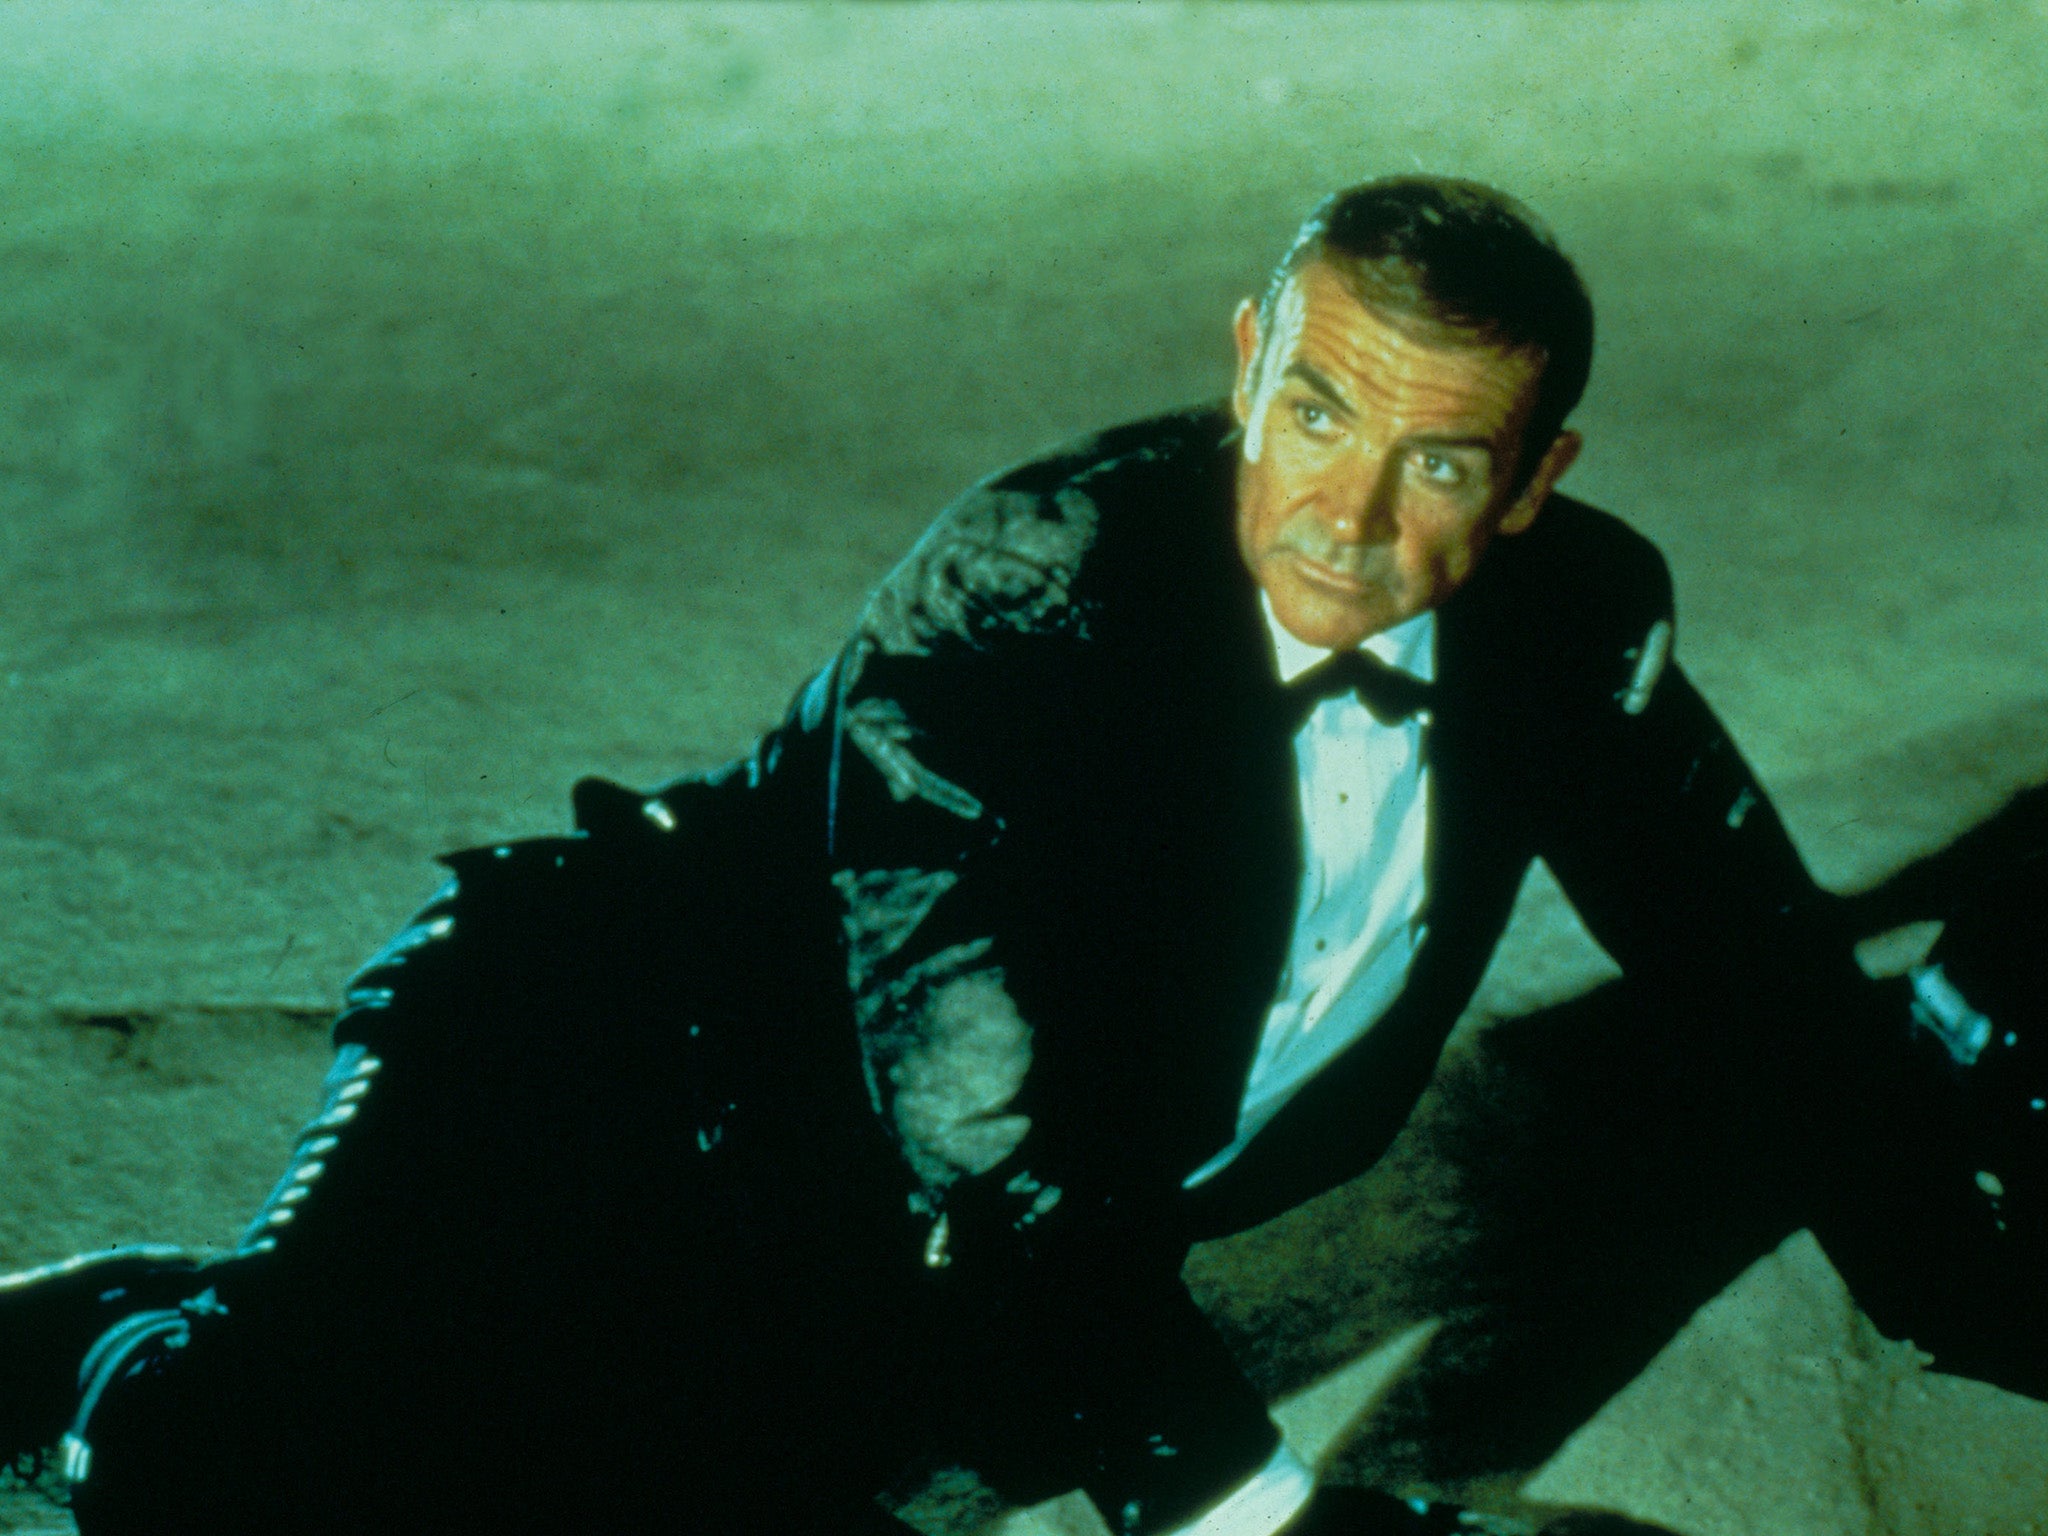 Sean Connery as James Bond in Never Say Never Again. Alexander's Fleming's franchise has been in existence for nearly 65 years. Is the Bond franchise timeless?